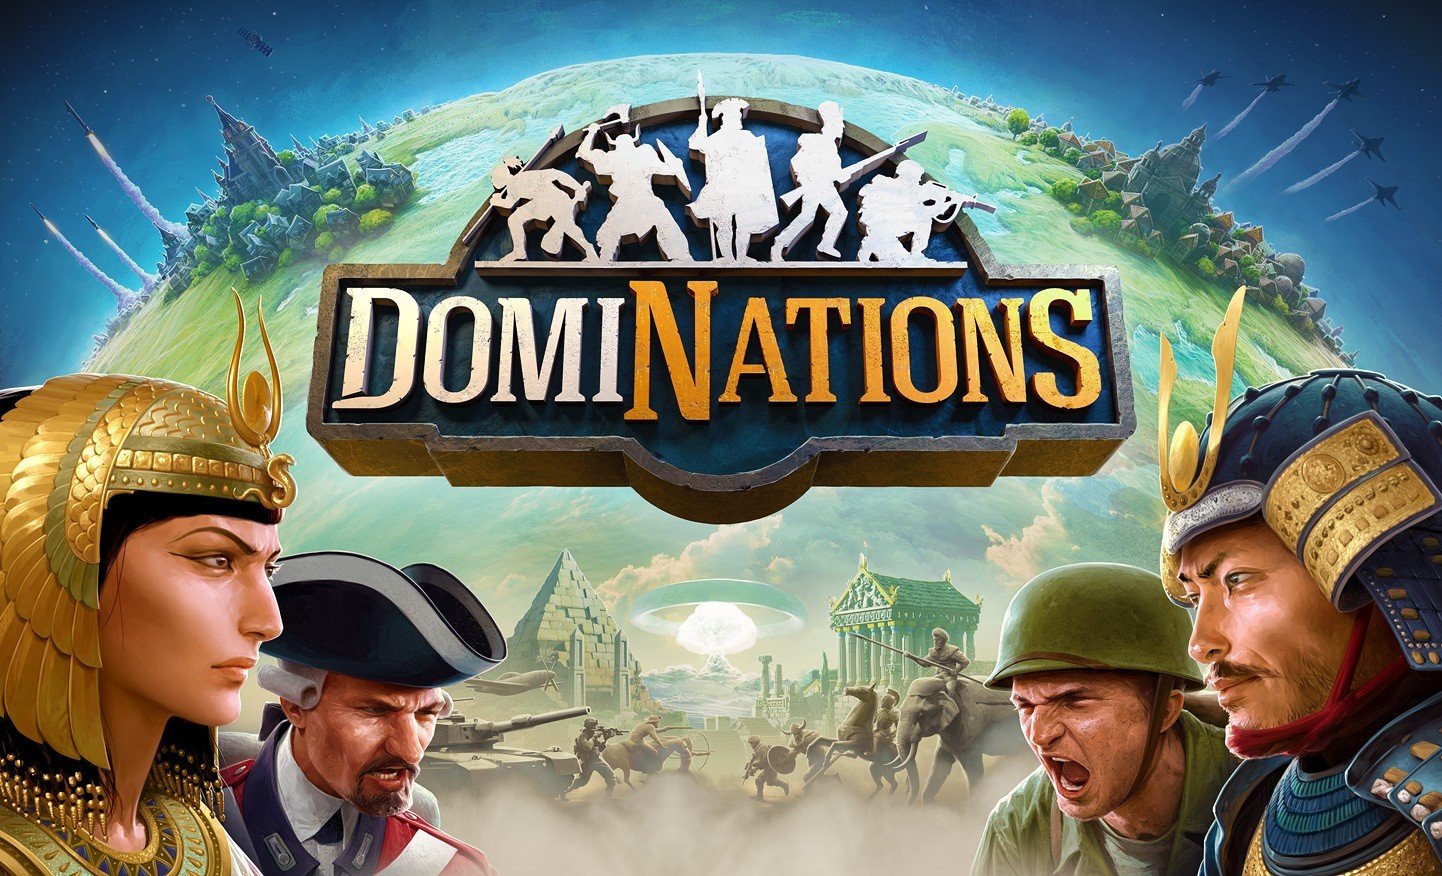 Image of DomiNations